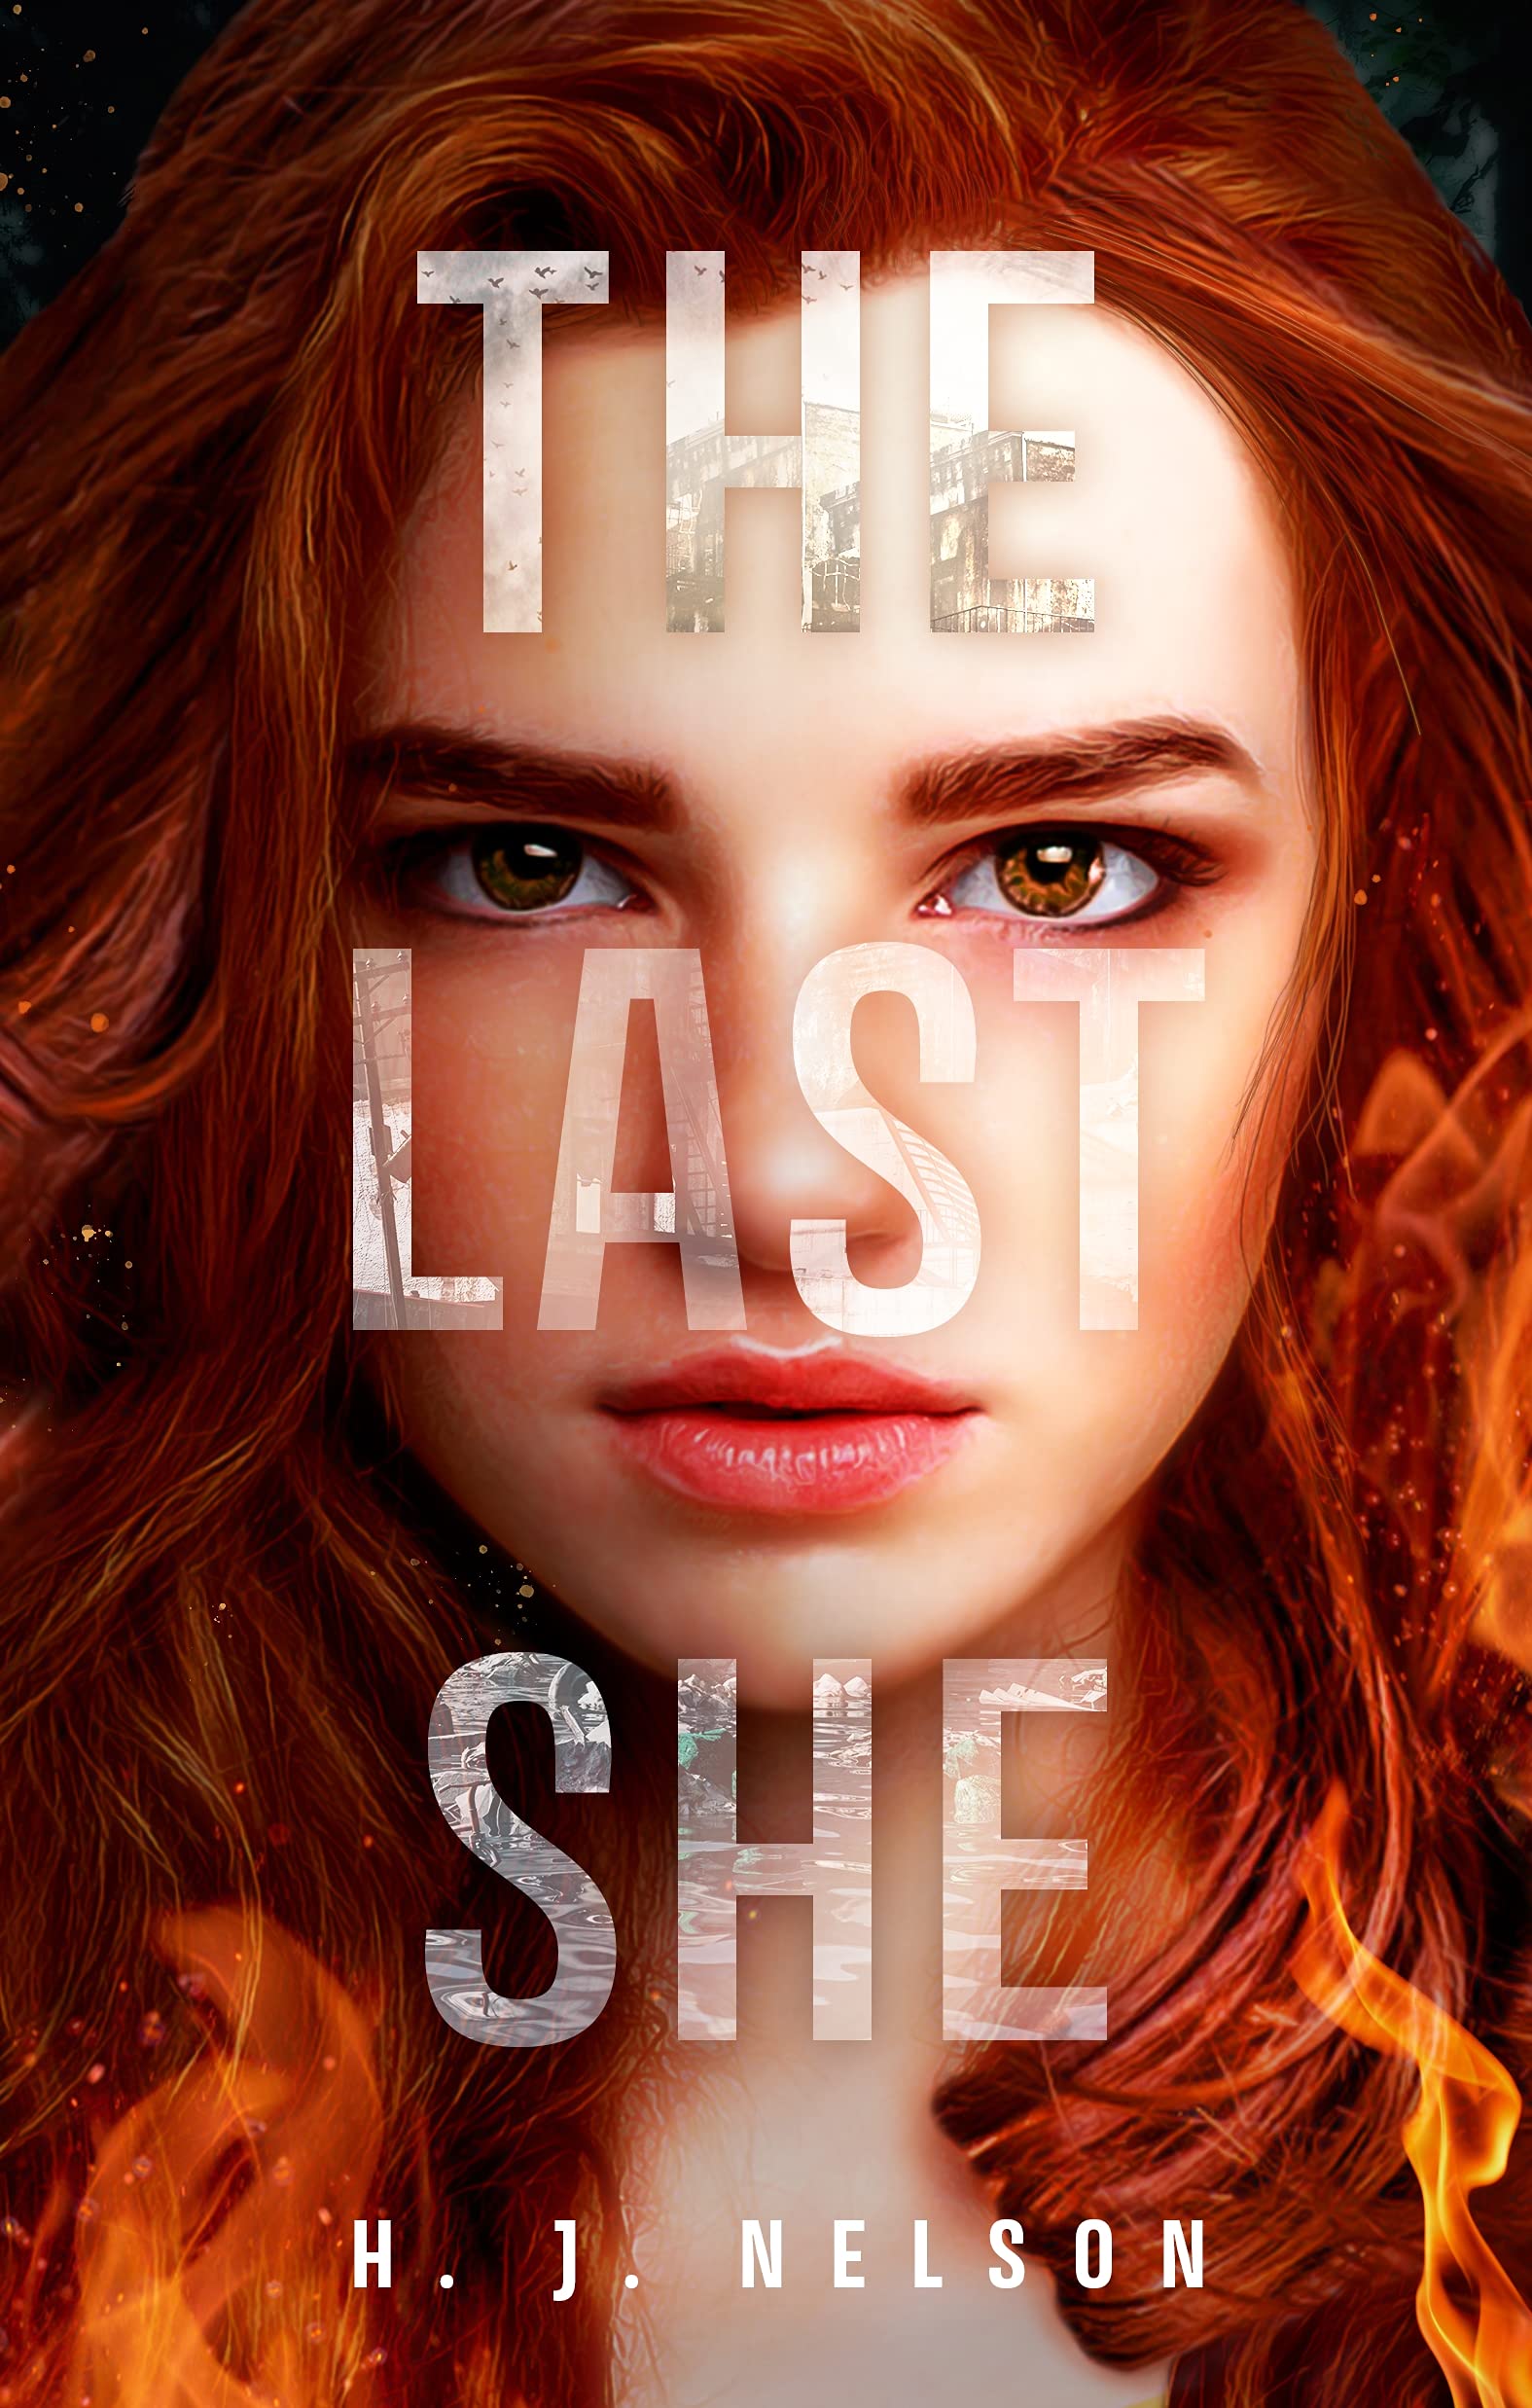 [EPUB] The Last She #1 The Last She by H.J. Nelson